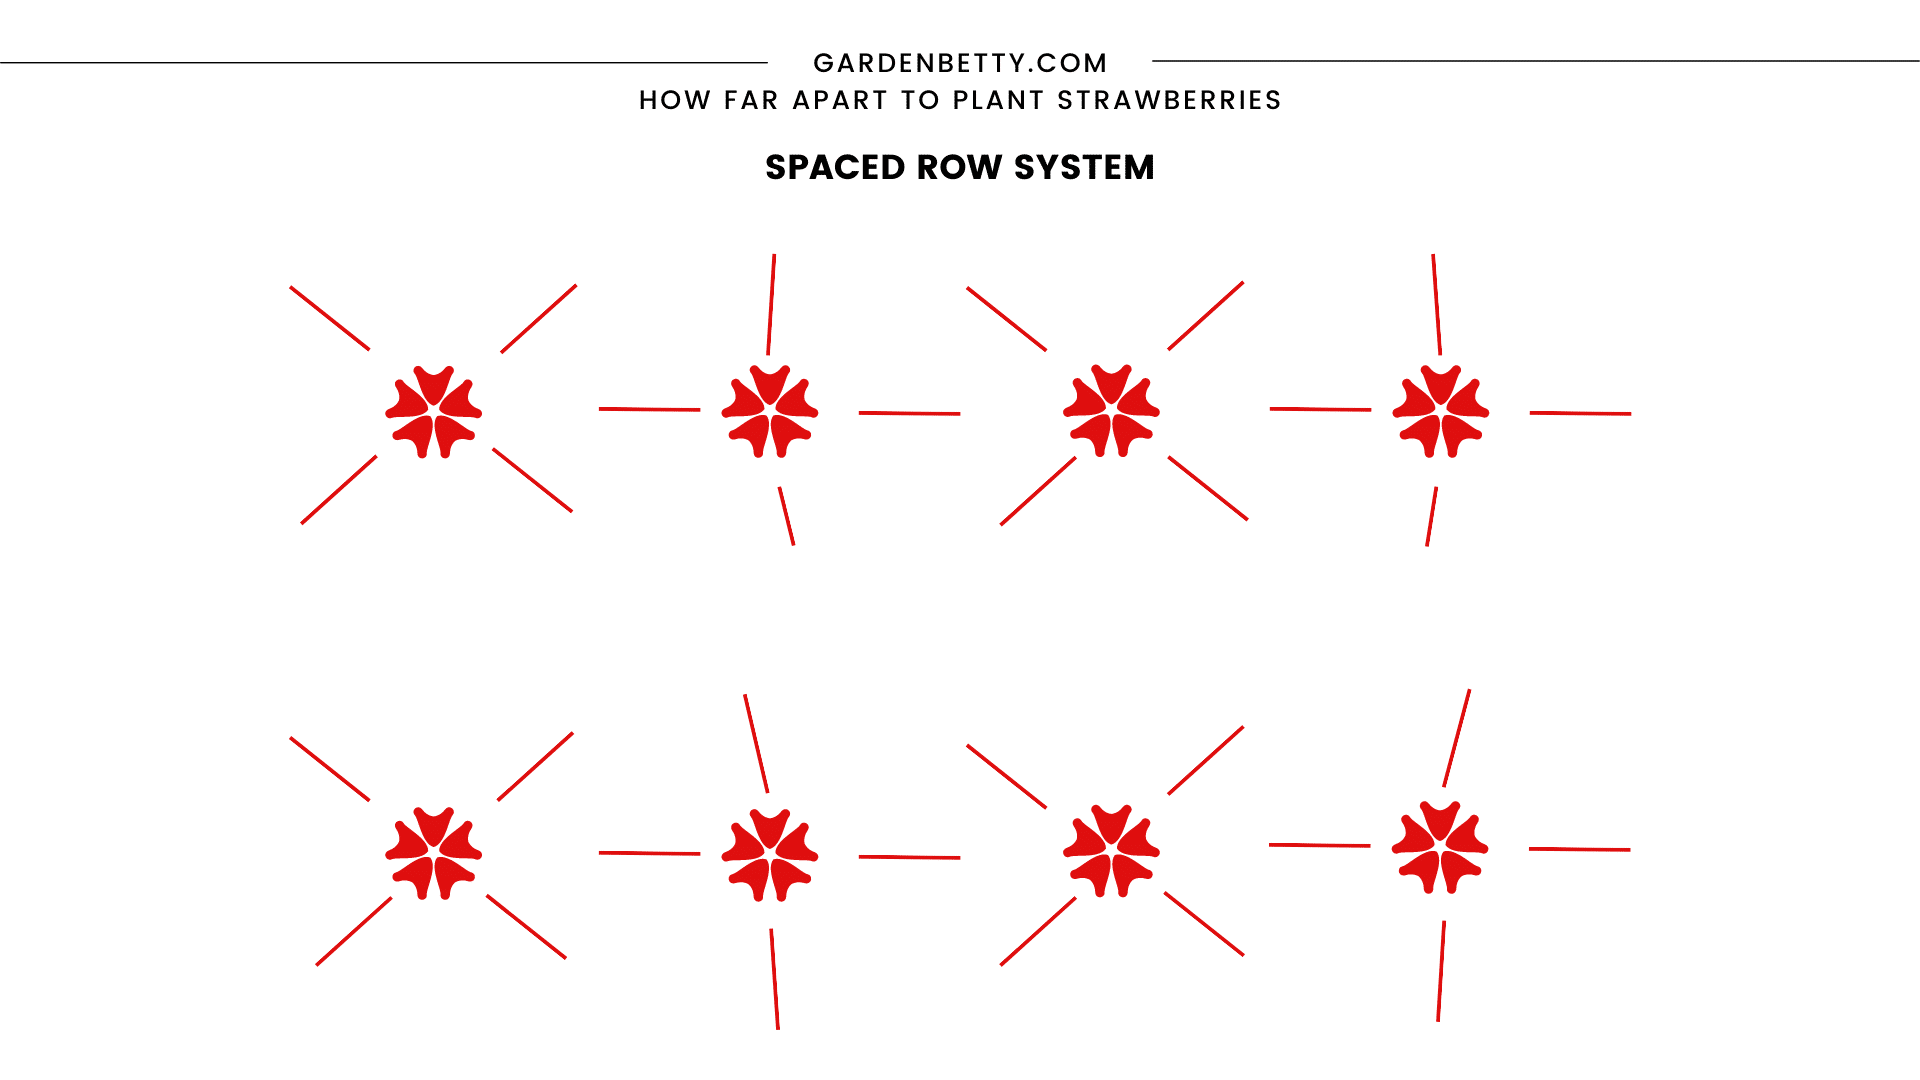 Illustration showing the spaced row system of spacing and planting strawberries